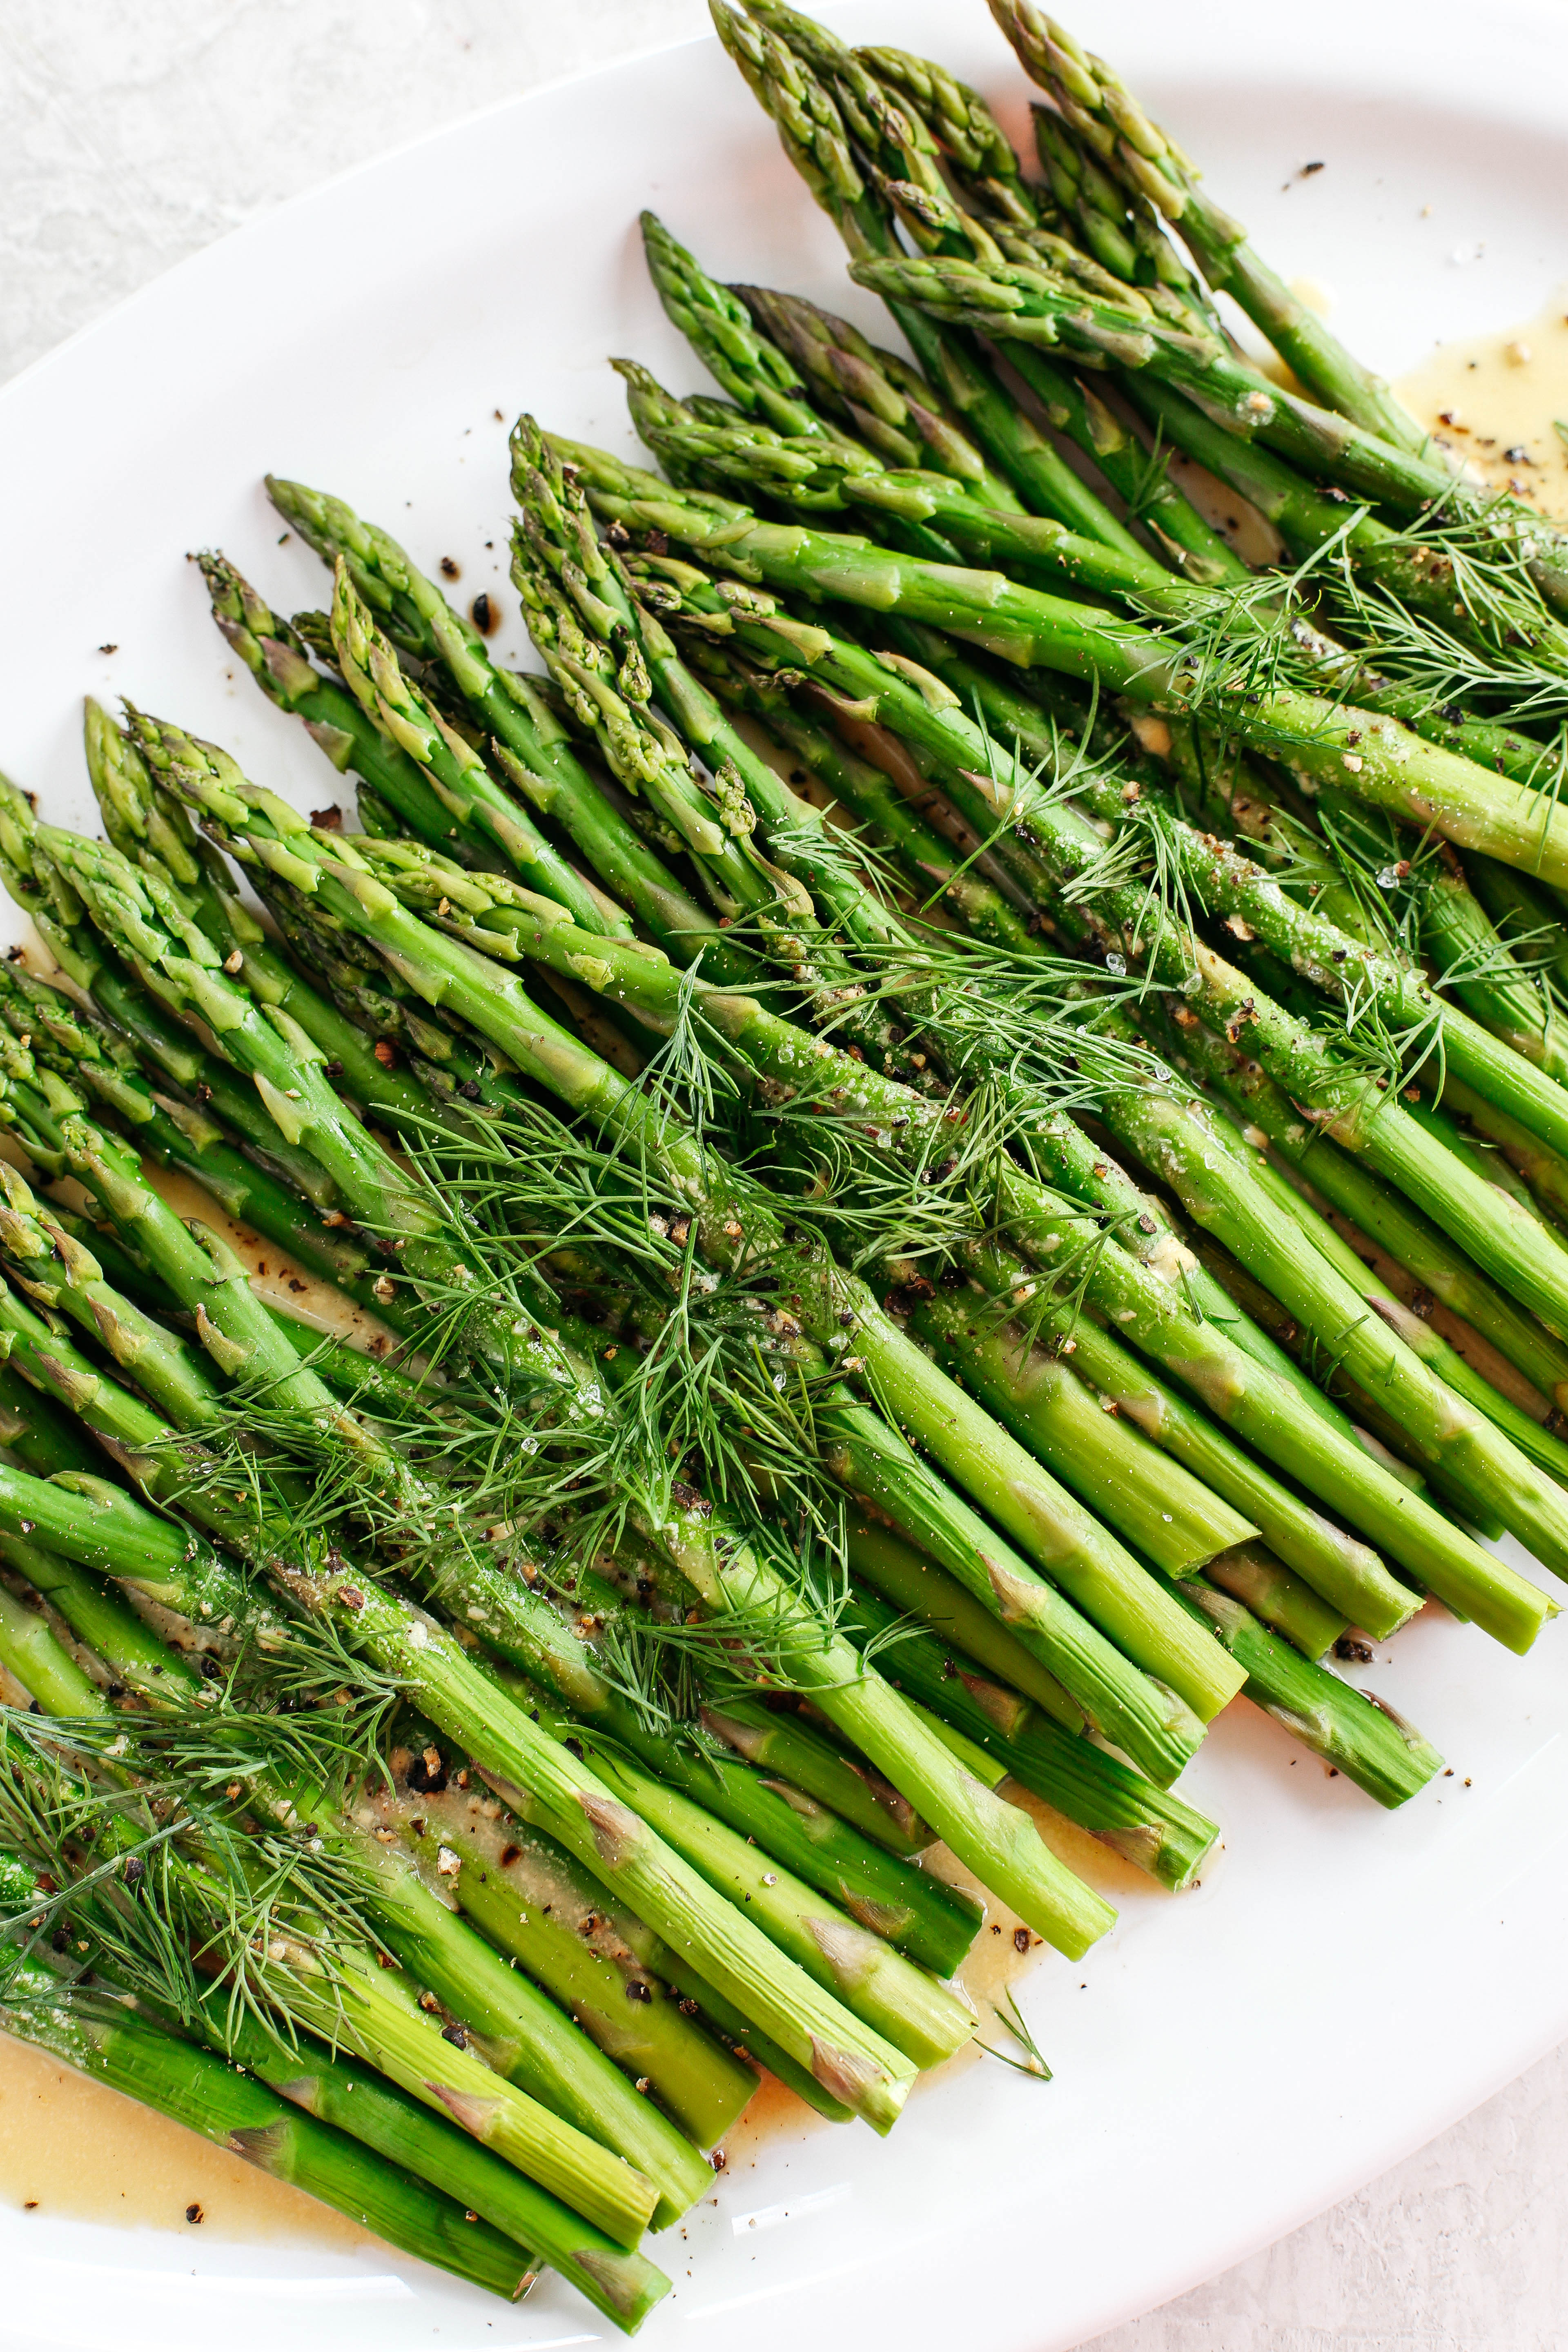 Baked Asparagus with delicious Mustard Dill Sauce makes the perfect healthy side dish for any meal with just a few simple ingredients! 